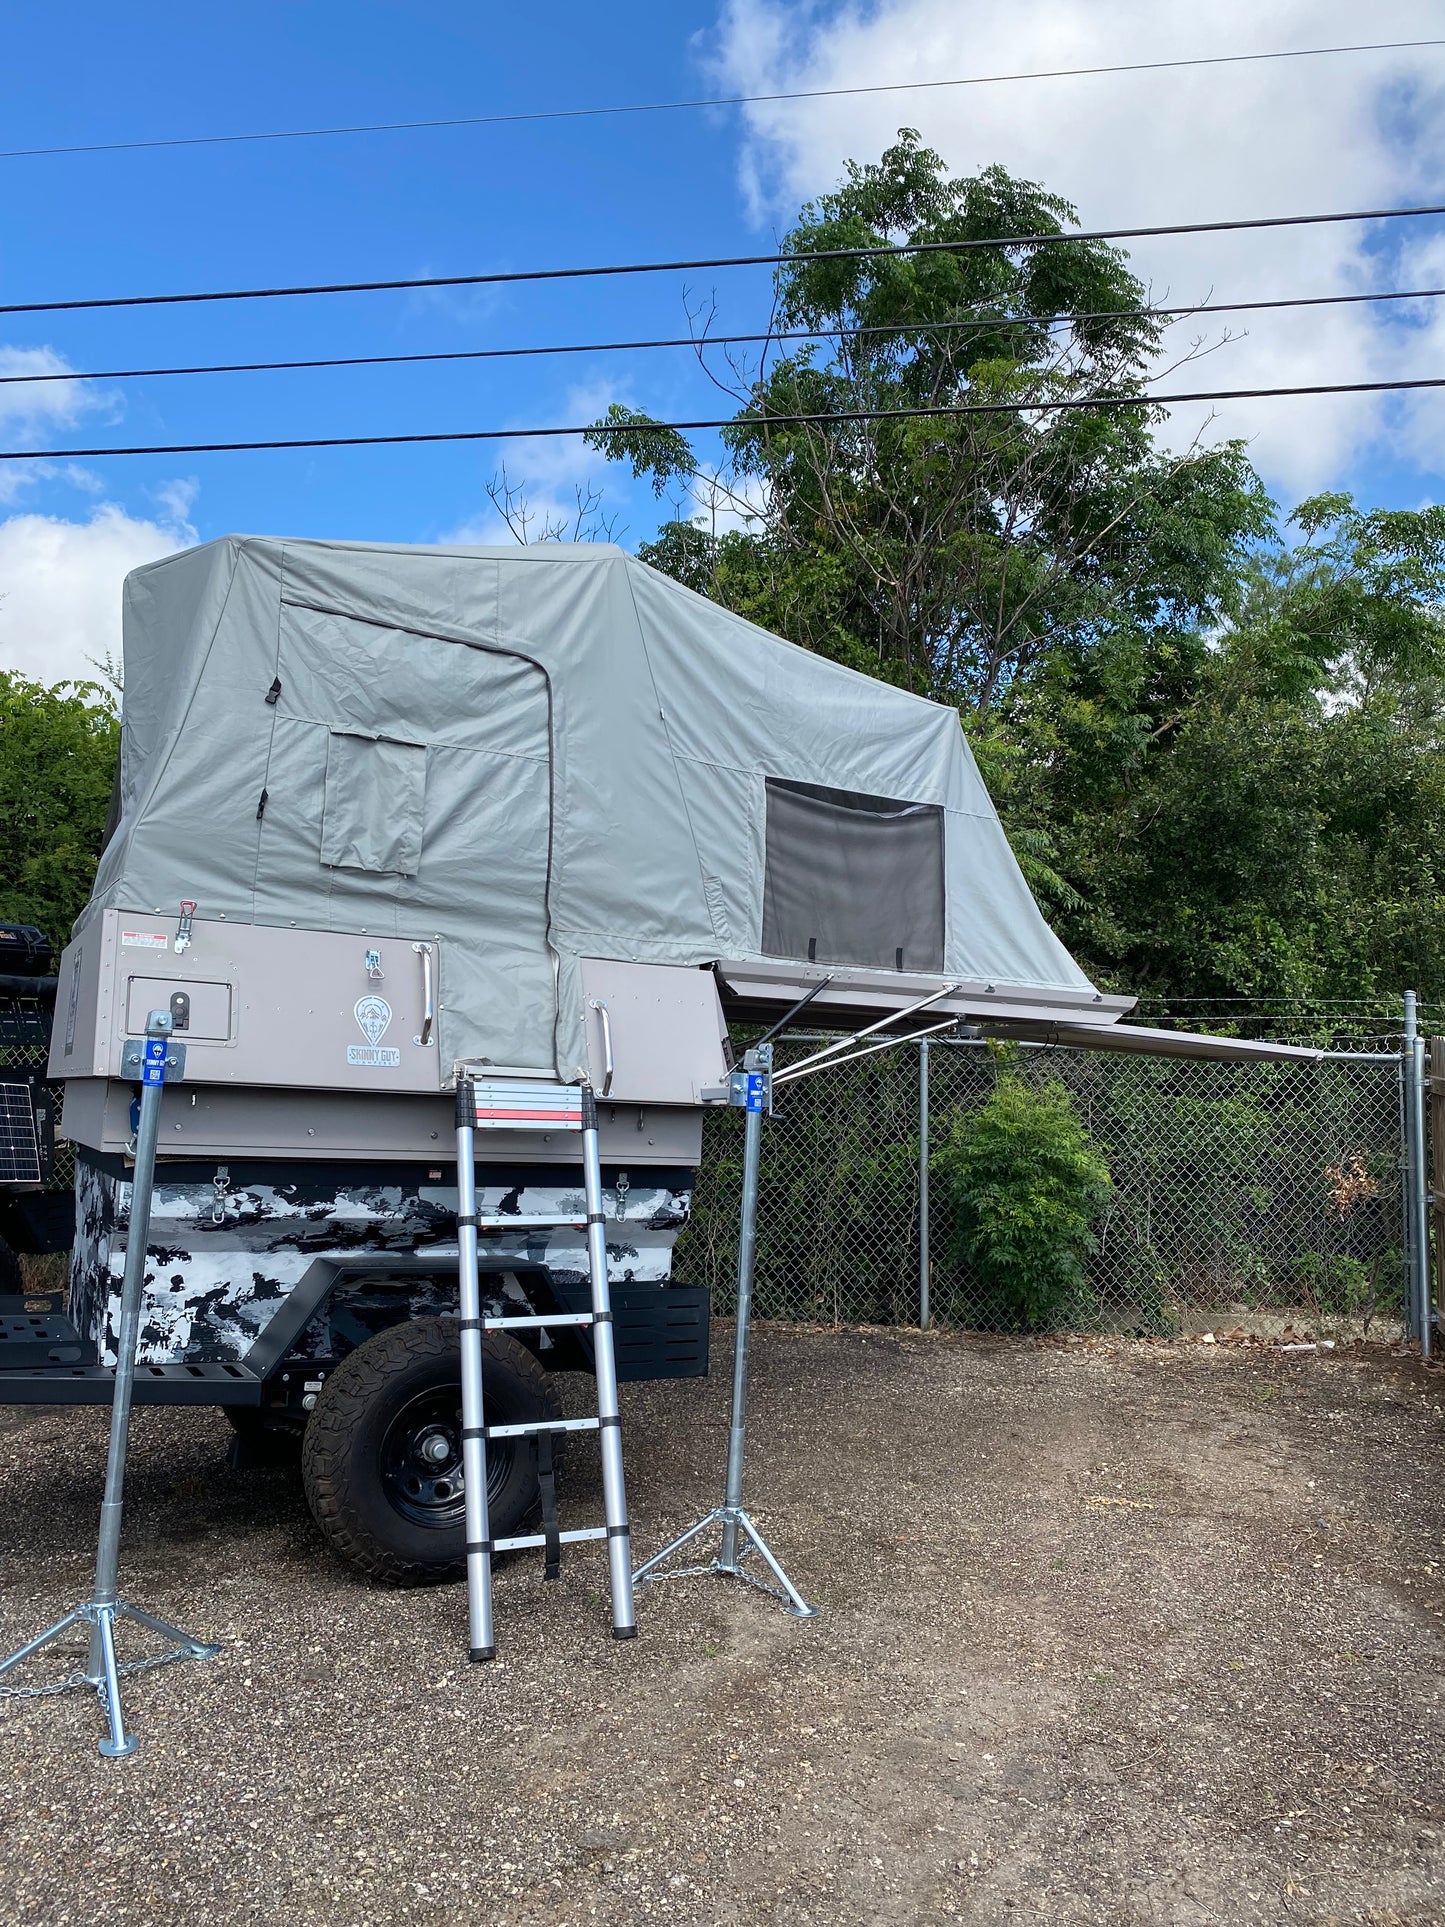 skinny guy truck bed all weather campers kit n kaboodle with outdoor kitchen and solar for sale near spring branch canyon lake texas at hawkes outdoors 2102512882